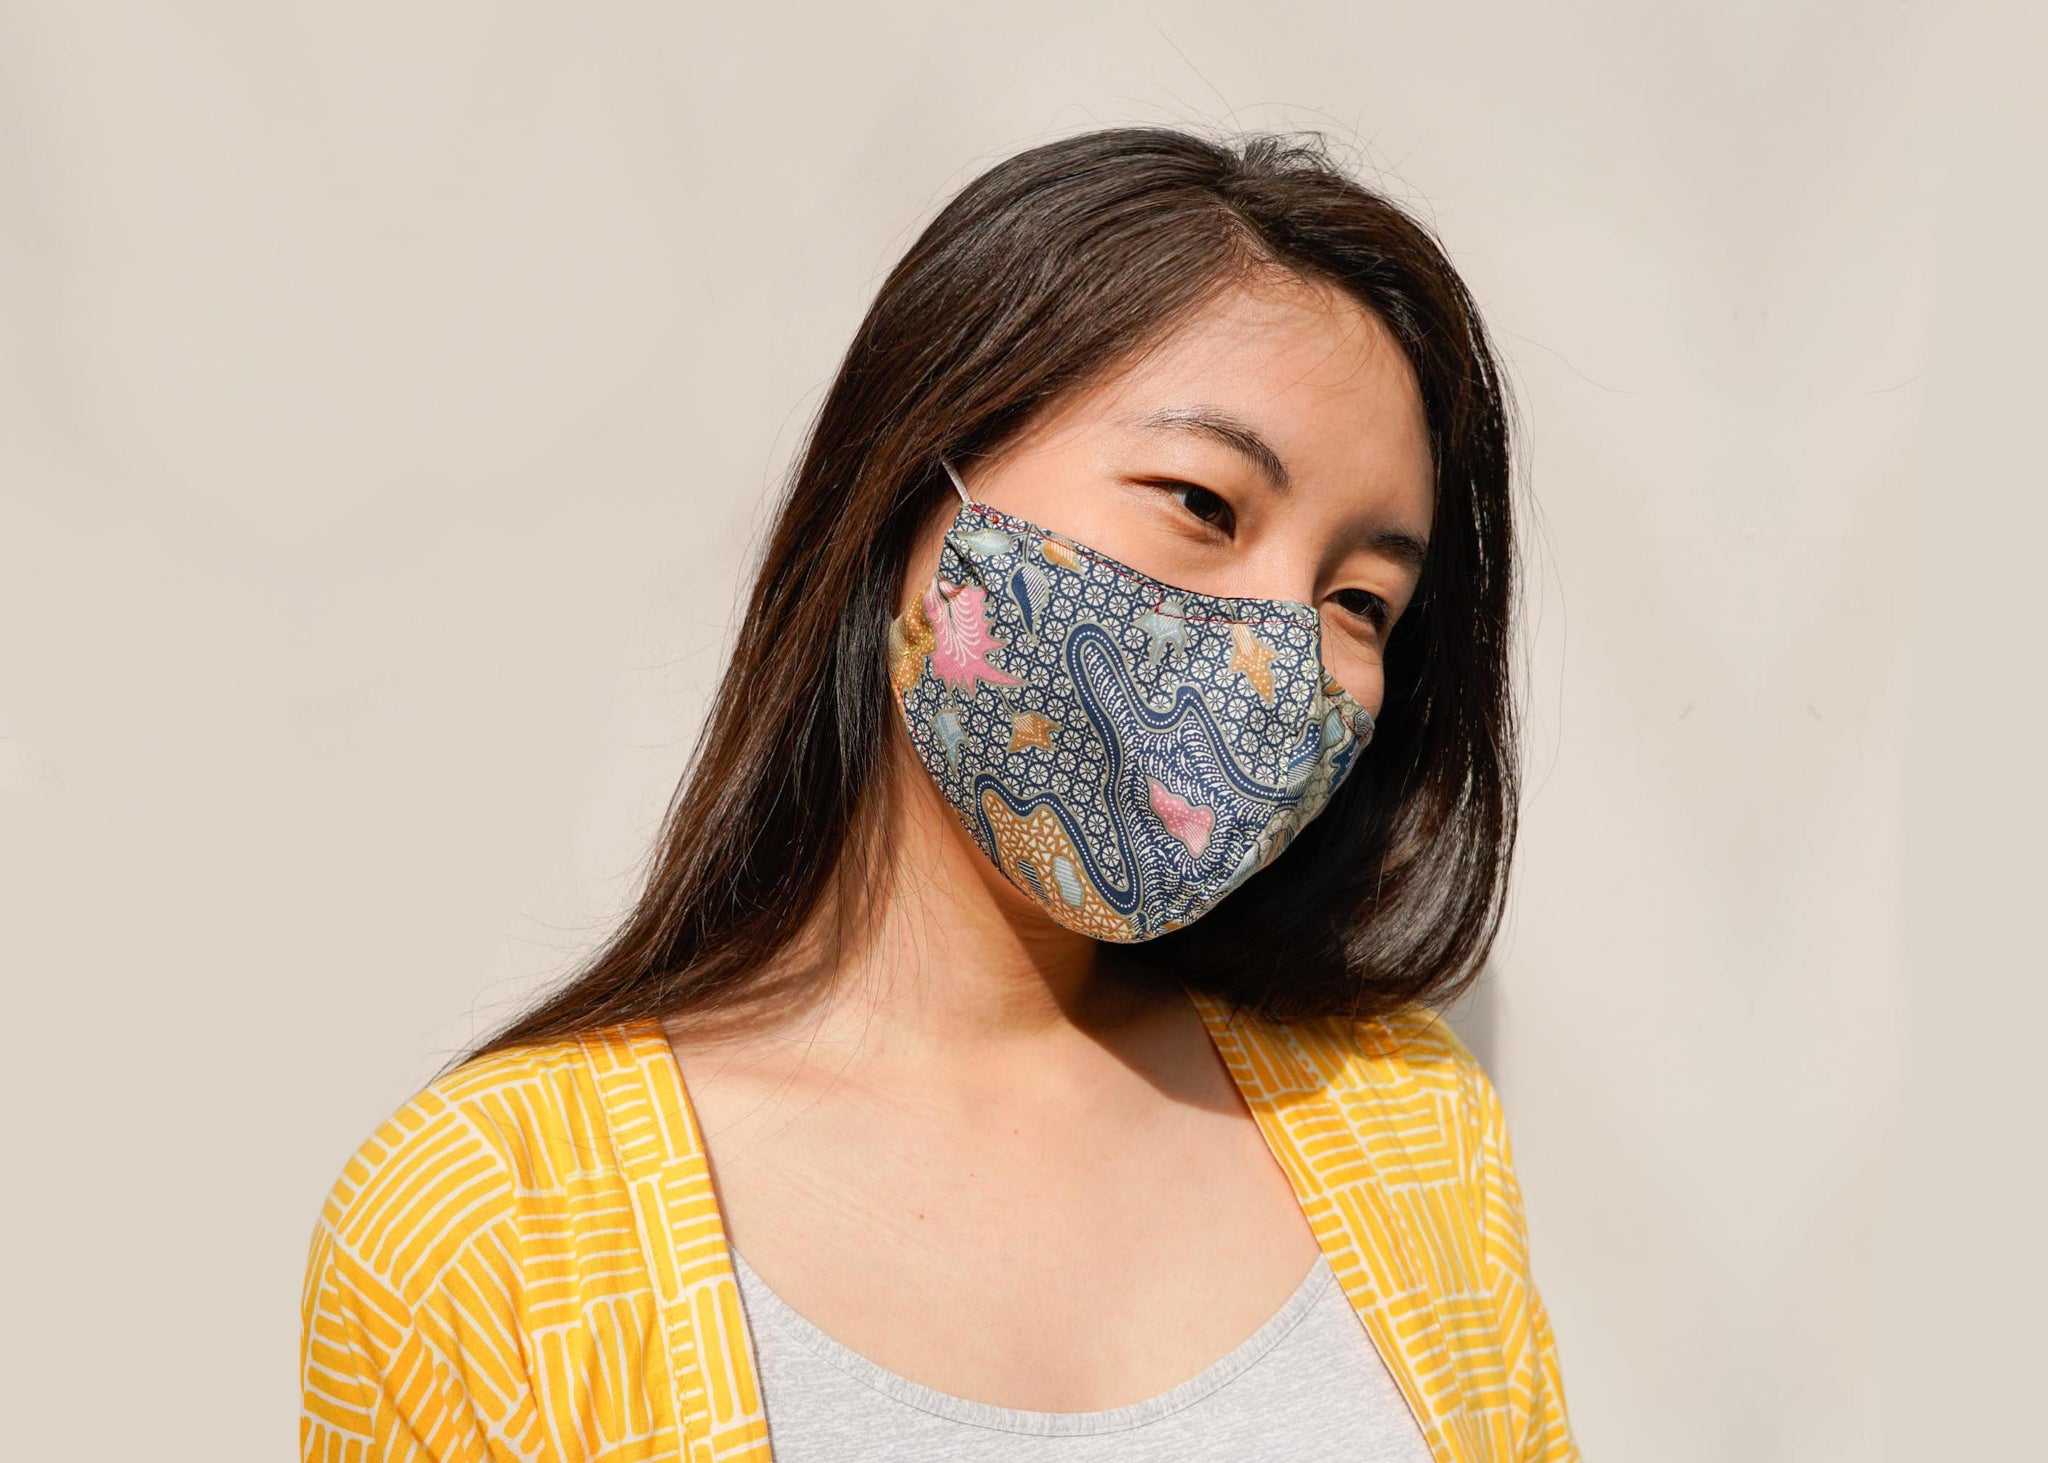 Short of masks? Make your own fabric mask (with nose wire and filter pocket!)